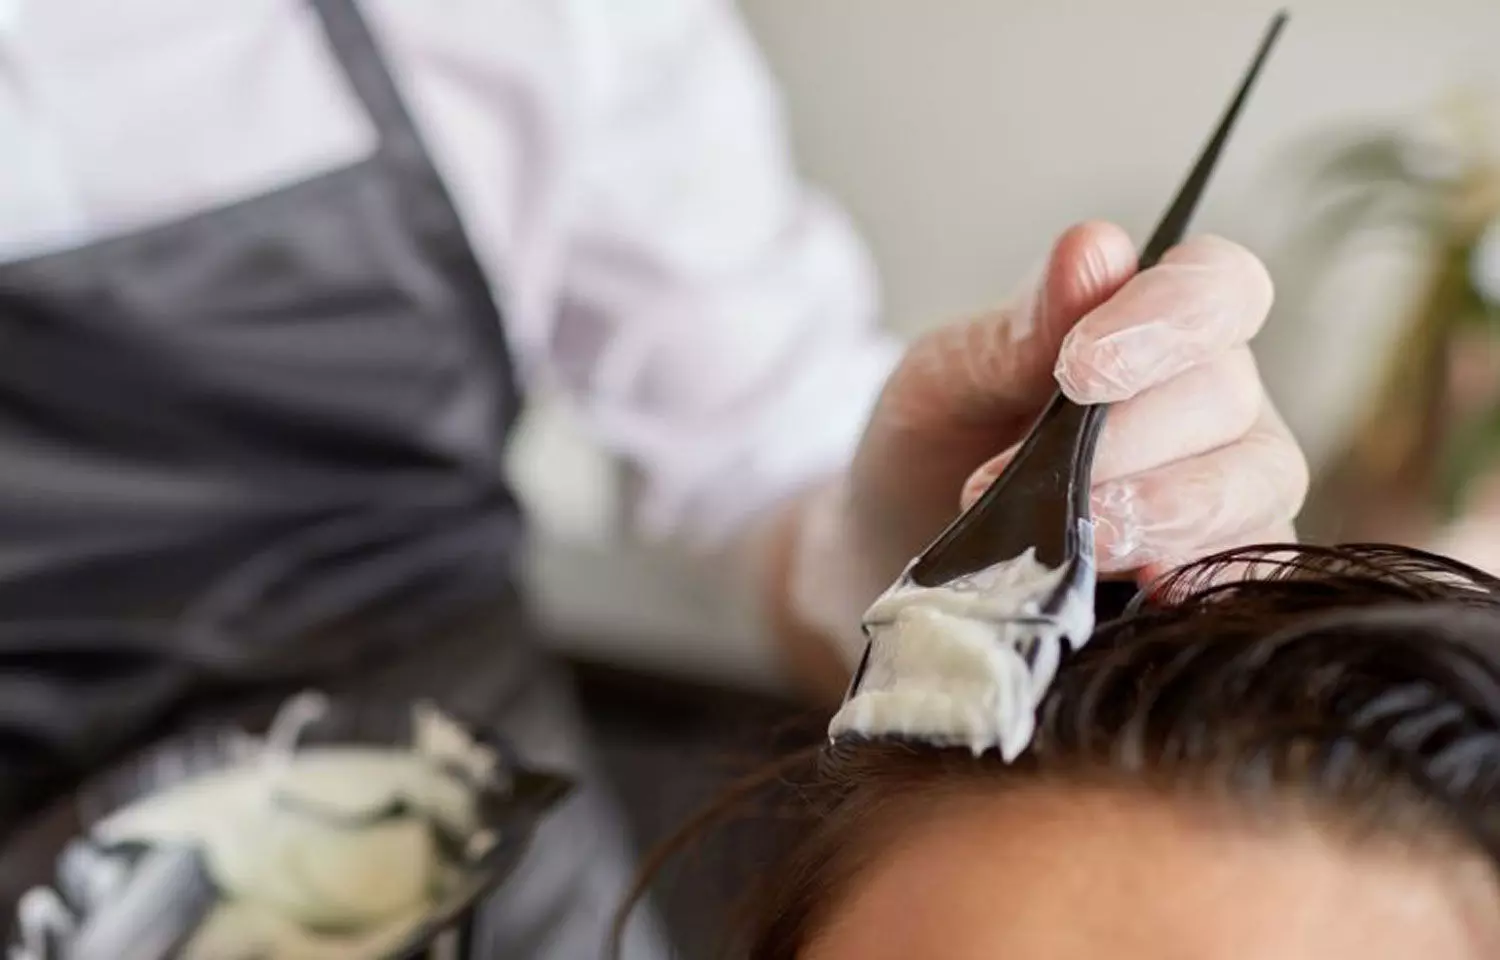 Hair colouring safe with respect to cancer risk, finds BMJ study